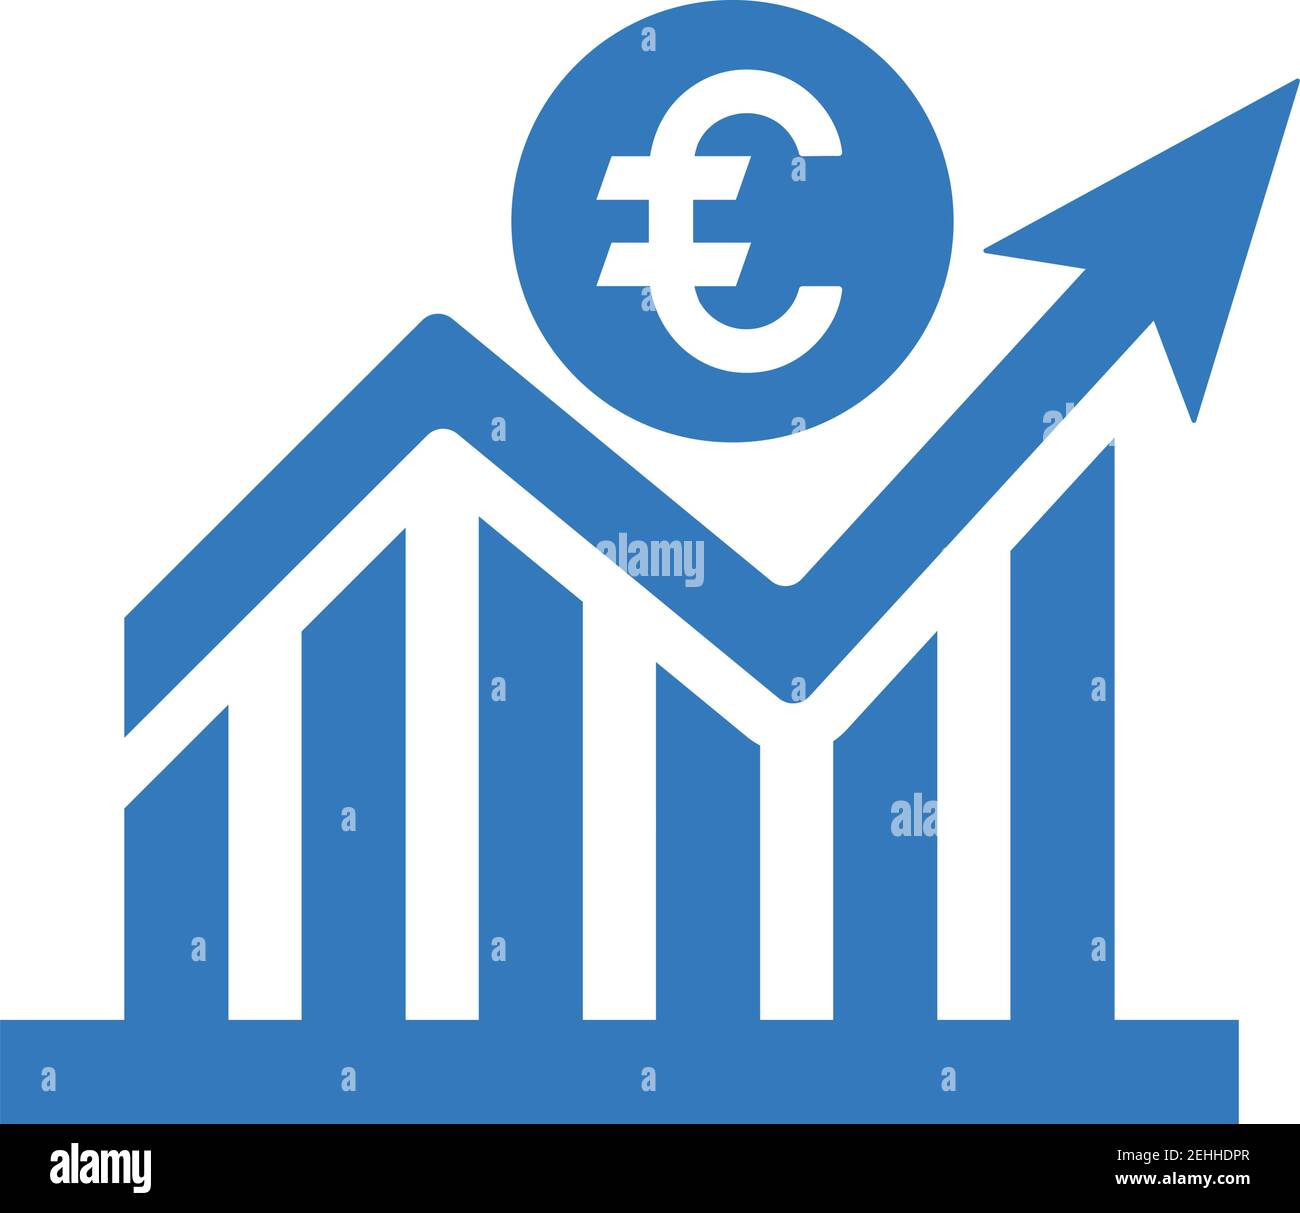 Euro bar chart financial report icon.. Beautiful design and fully editable vector for commercial, print media, web or any type of design projects. Stock Vector